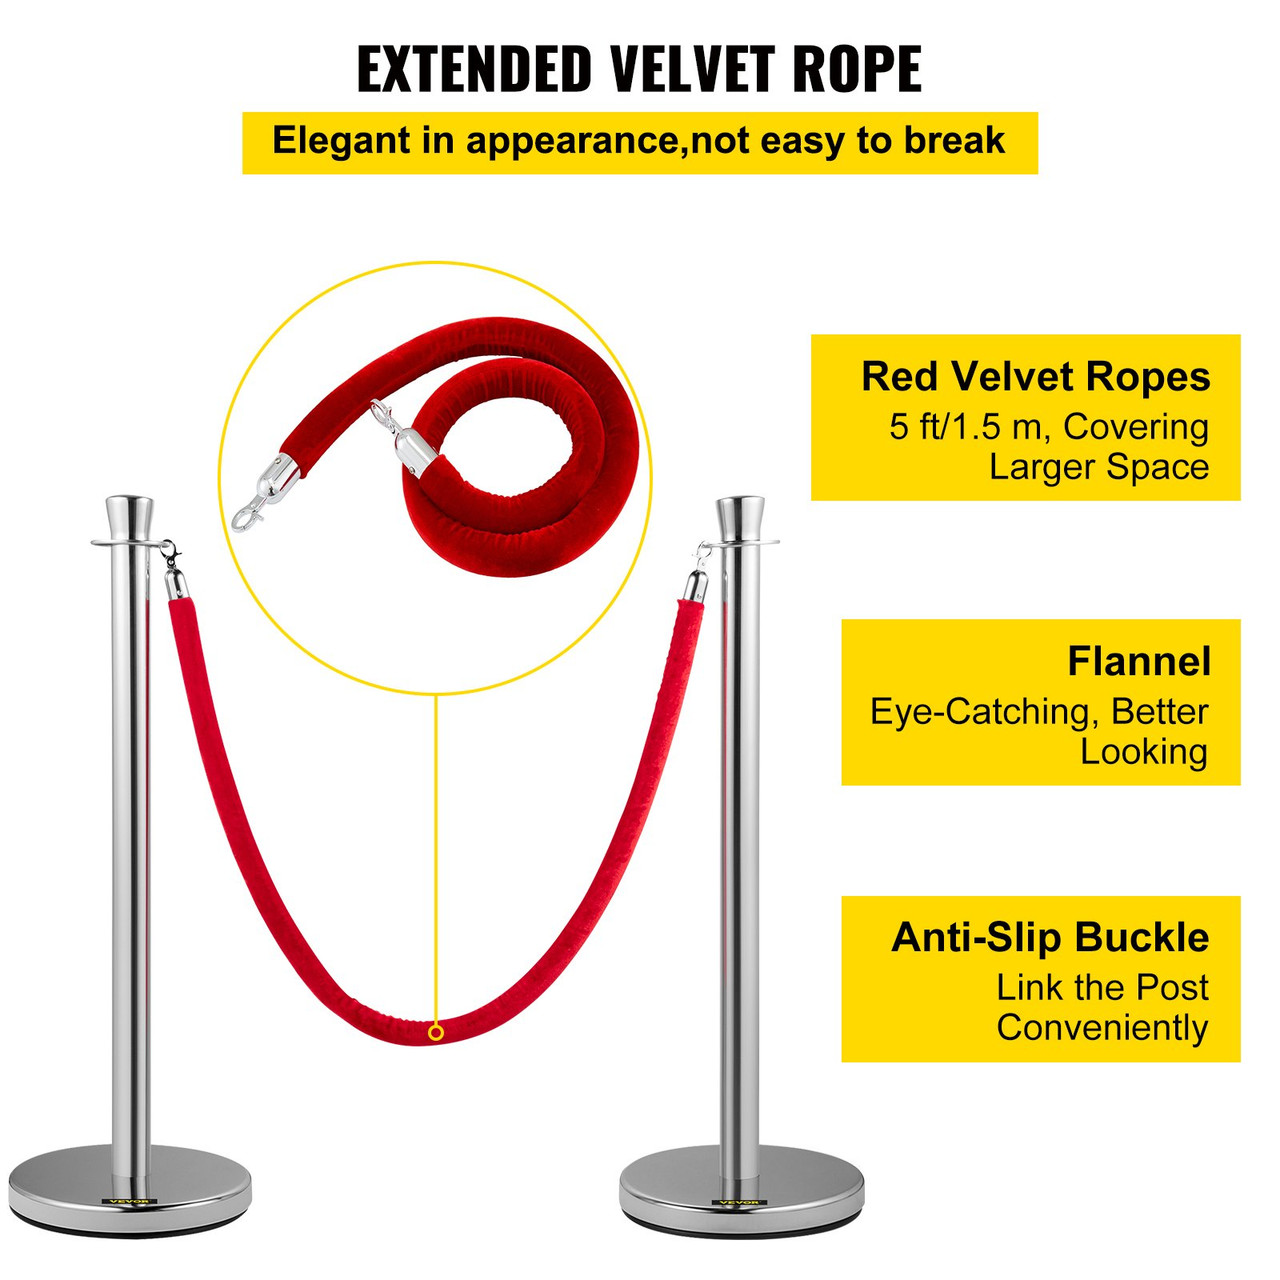 Crowd Control Stanchion, Set of 2 Pieces Stanchion Set, Stanchion Set with 5 ft/1.5 m Red Velvet Rope, Silver Crowd Control Barrier w/Sturdy Concrete and Metal Base - Easy Connect Assembly (100-91060)